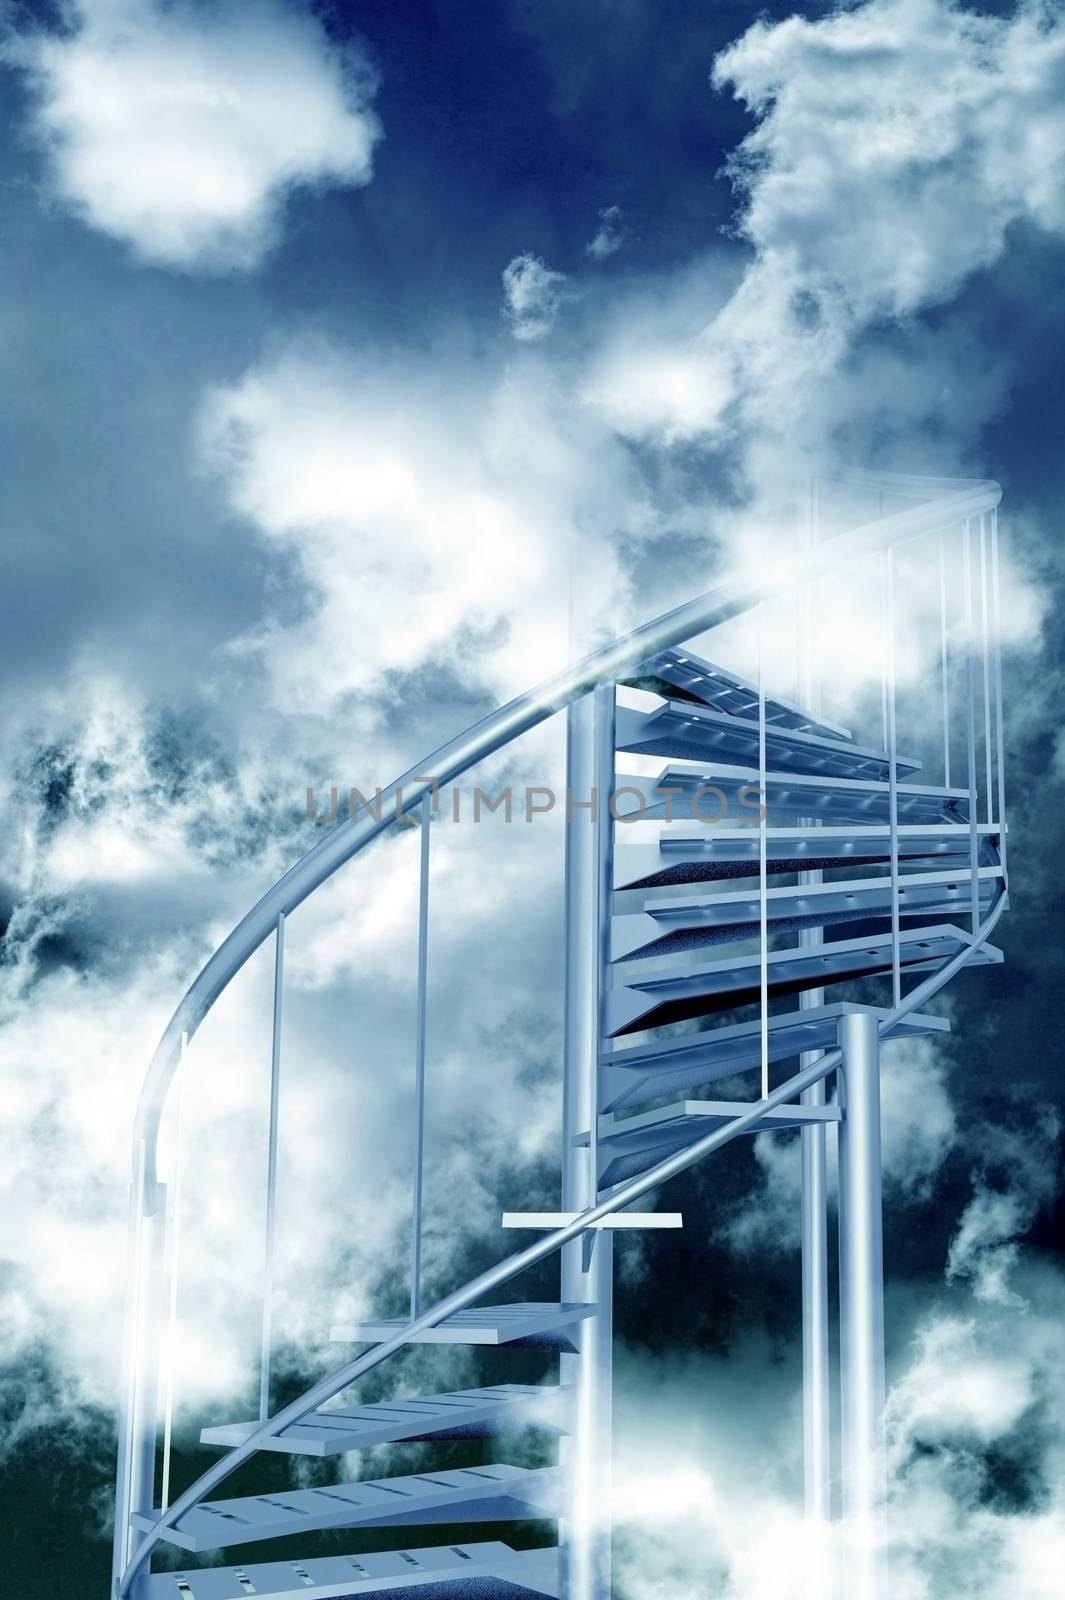 Stairs to Sky. Steel Spiral Stairs to Cloudy Sky. Abstract Illustration. Vertical Design